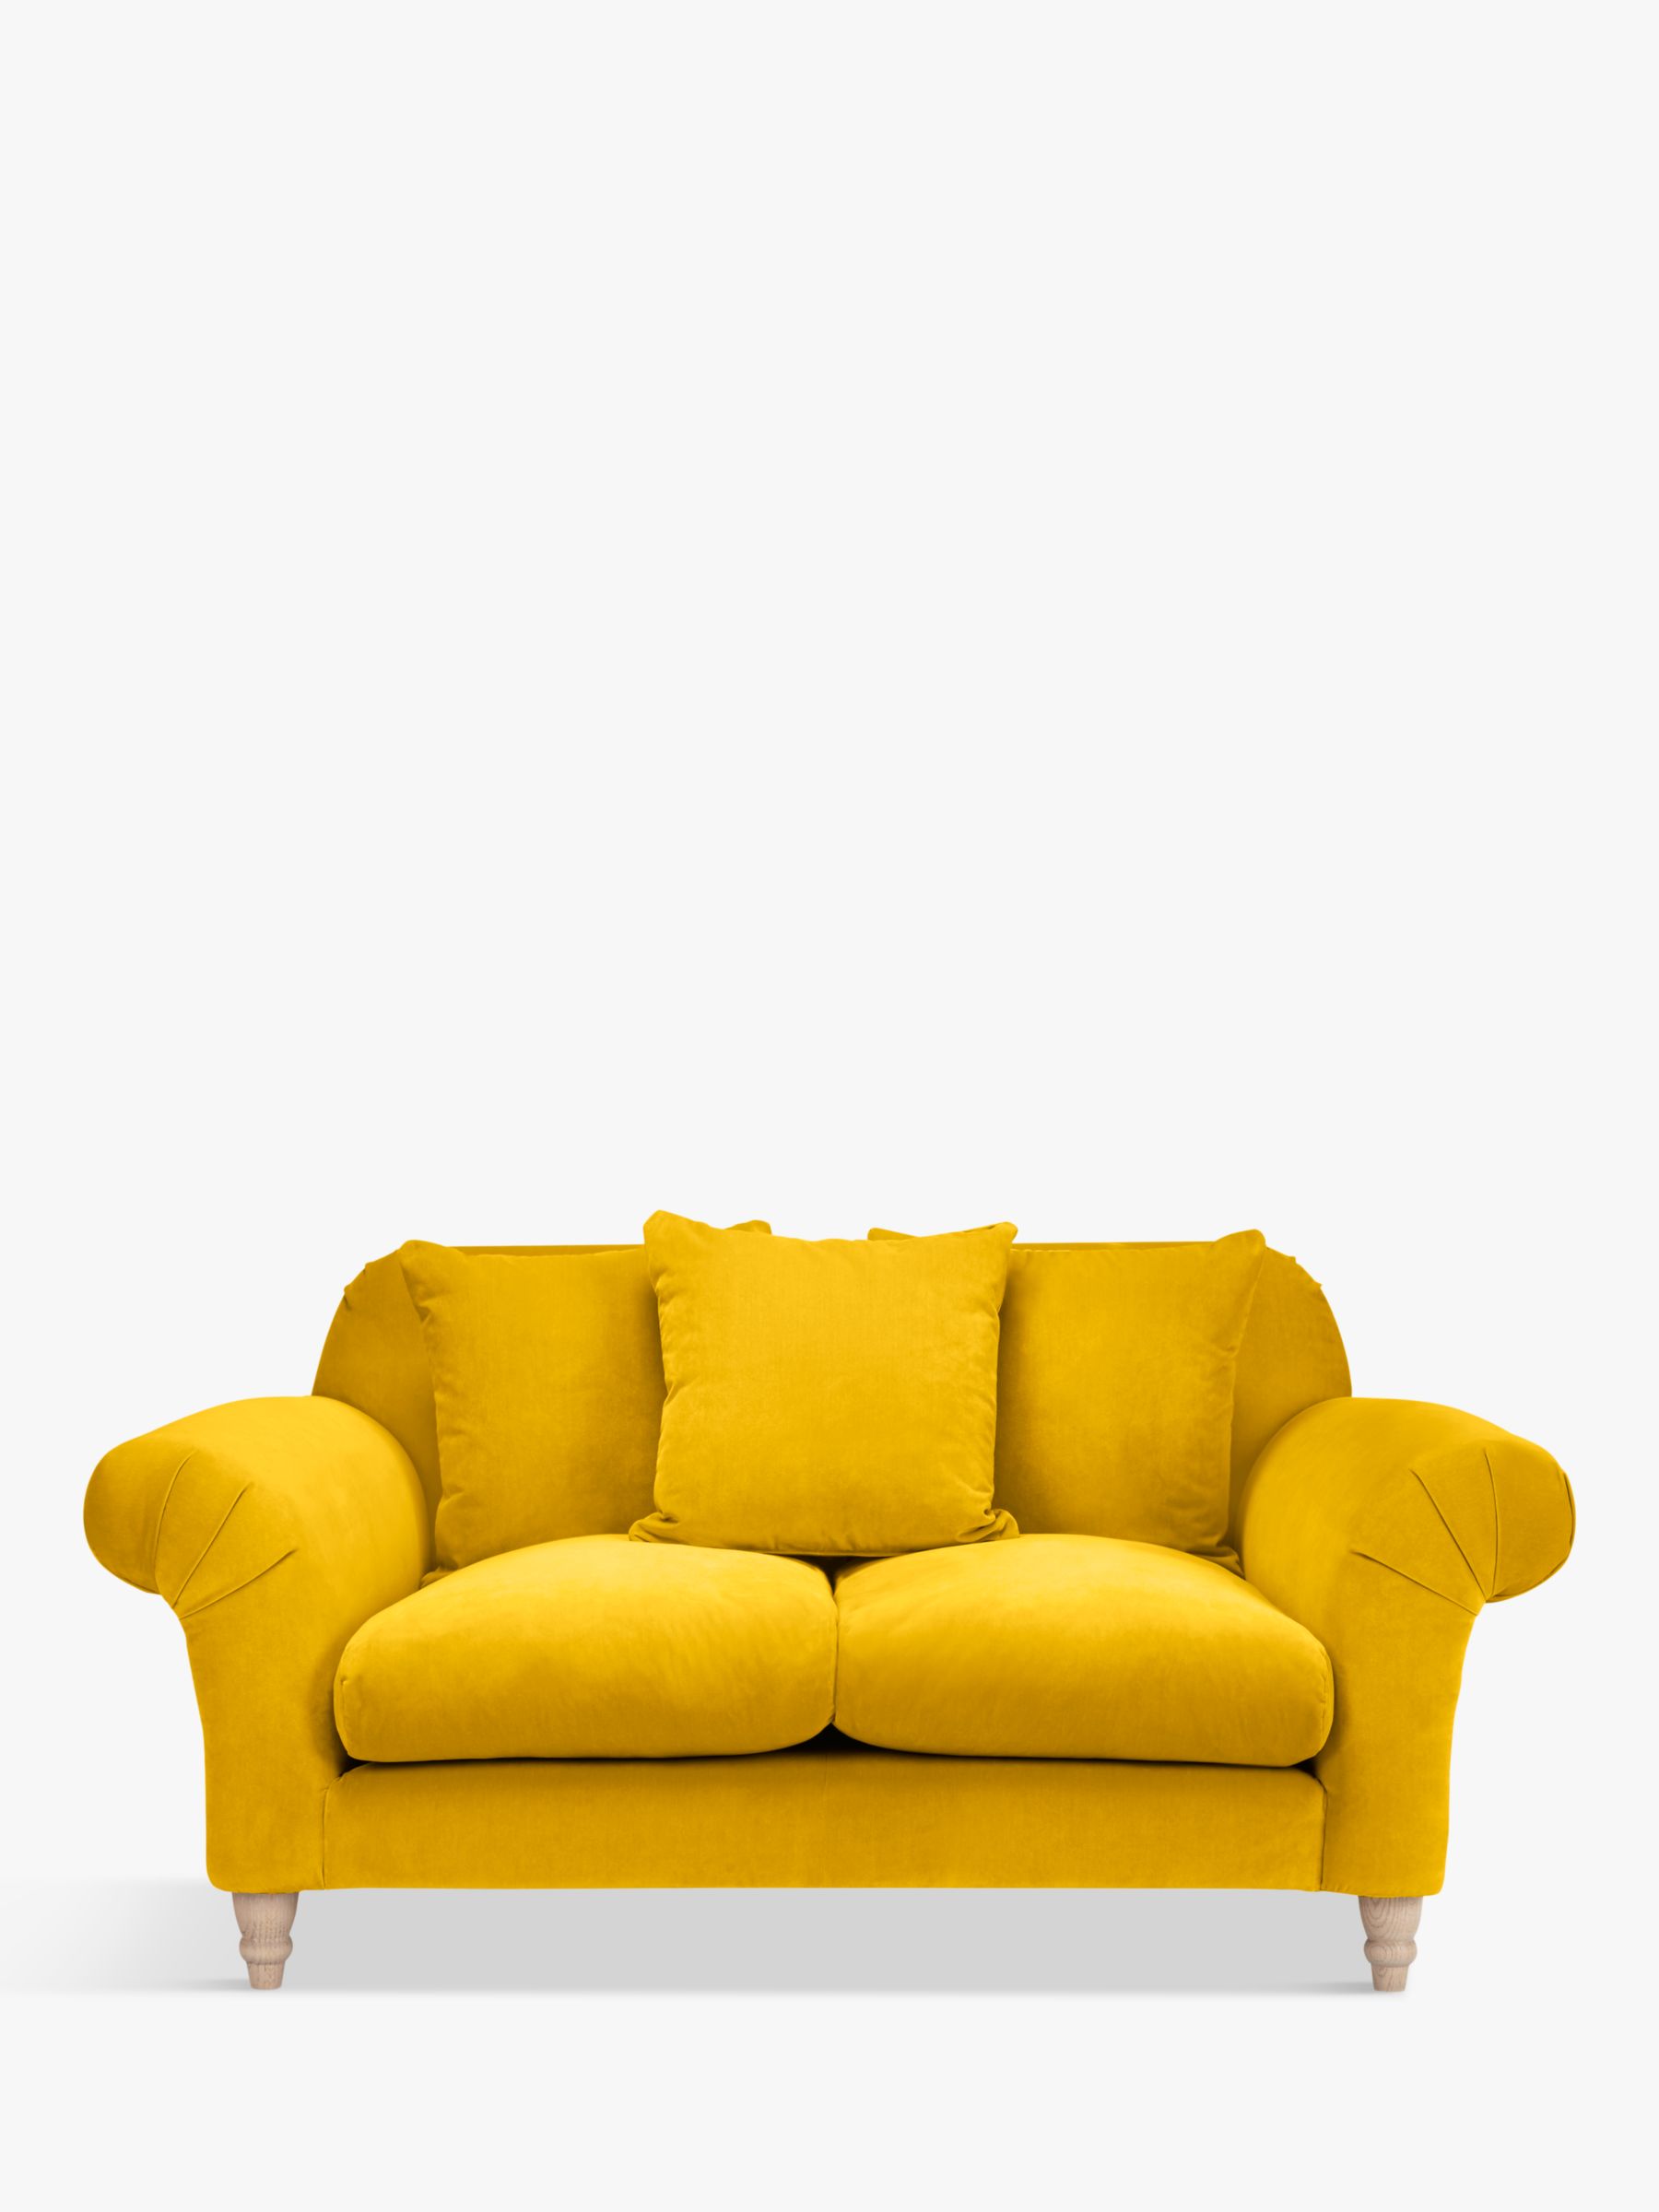 Doodler Small 2 Seater Sofa by Loaf at John Lewis